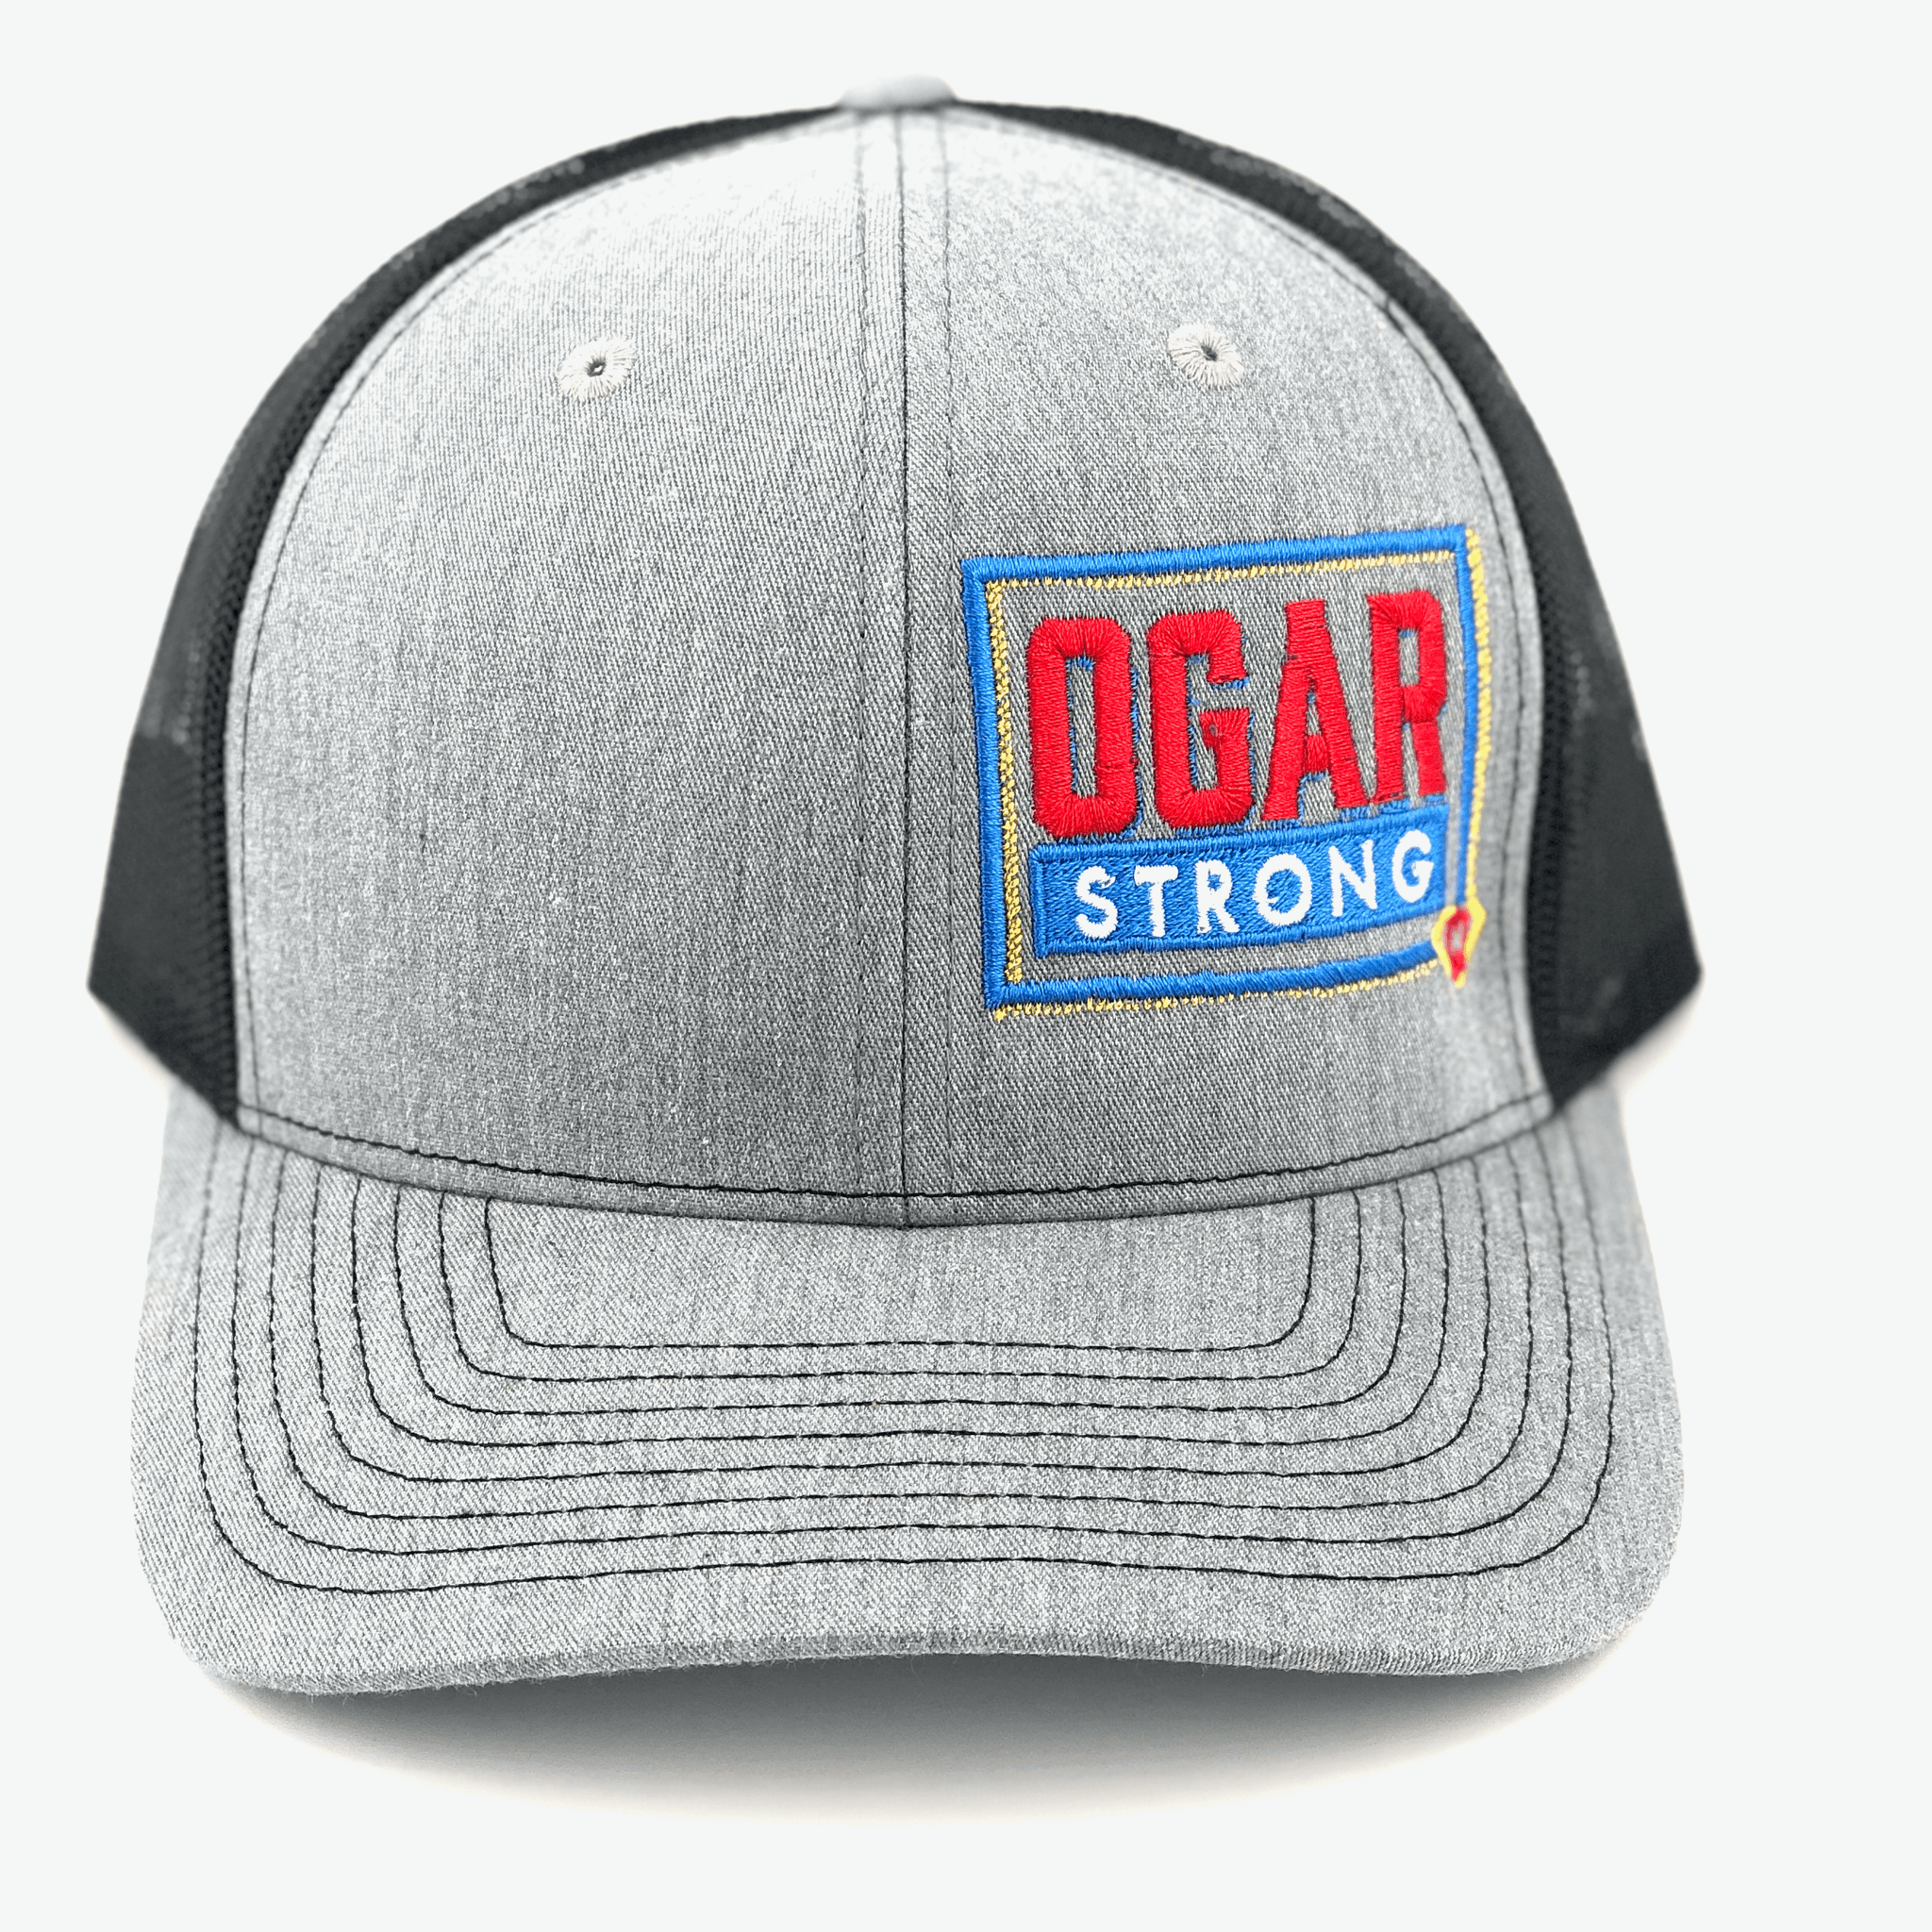 Trucker hat in black mesh - grey front panel with the Ogar Strong Logo embroidered on the front left panel